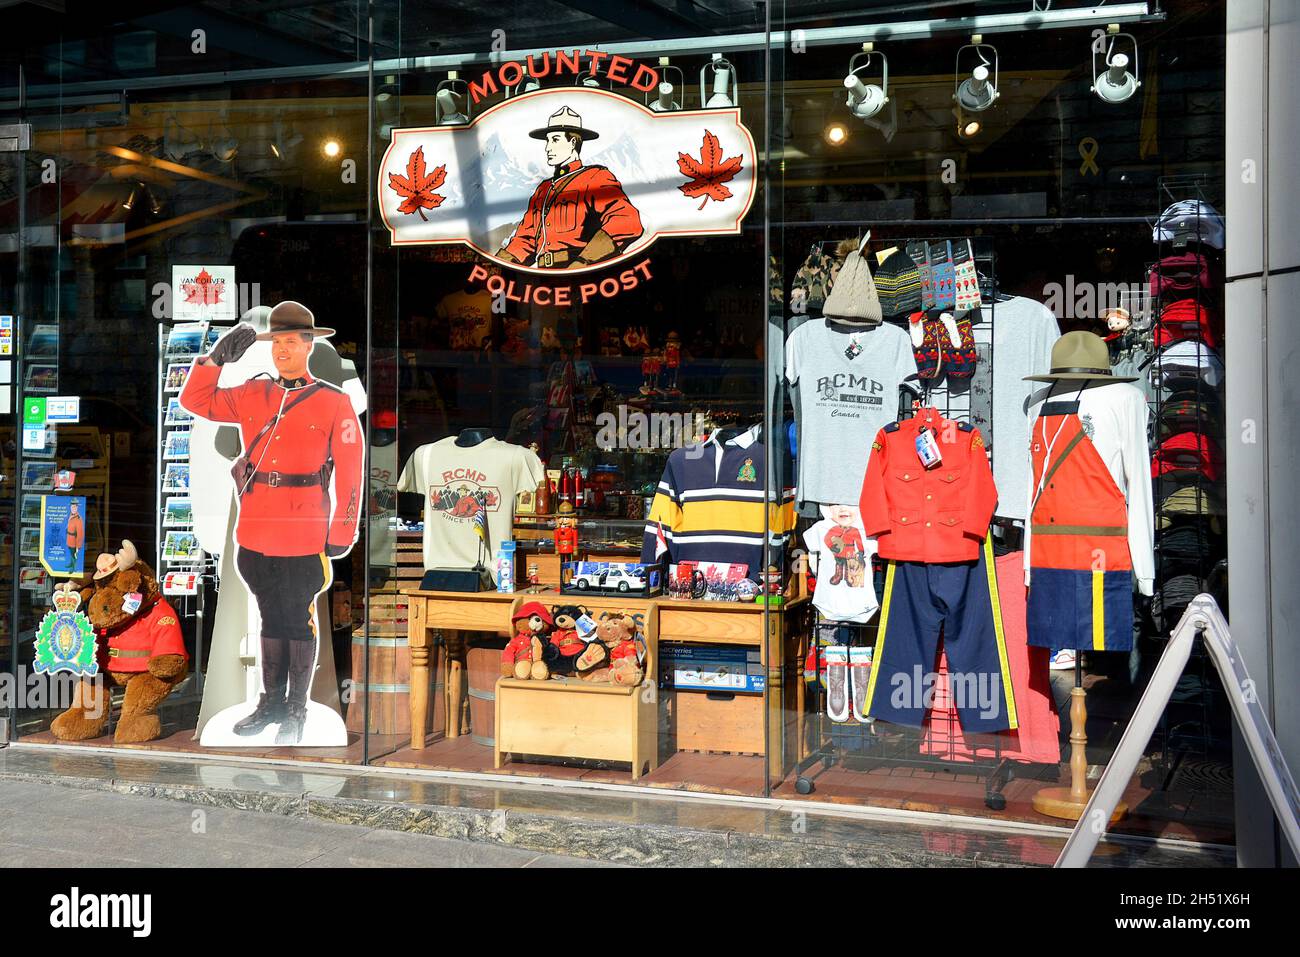 Vancouver, Canada - March 4, 2020: The Mounted Police Post Gift Shop on West Cordova Street is the only official retail store of RCMP products. The ot Stock Photo